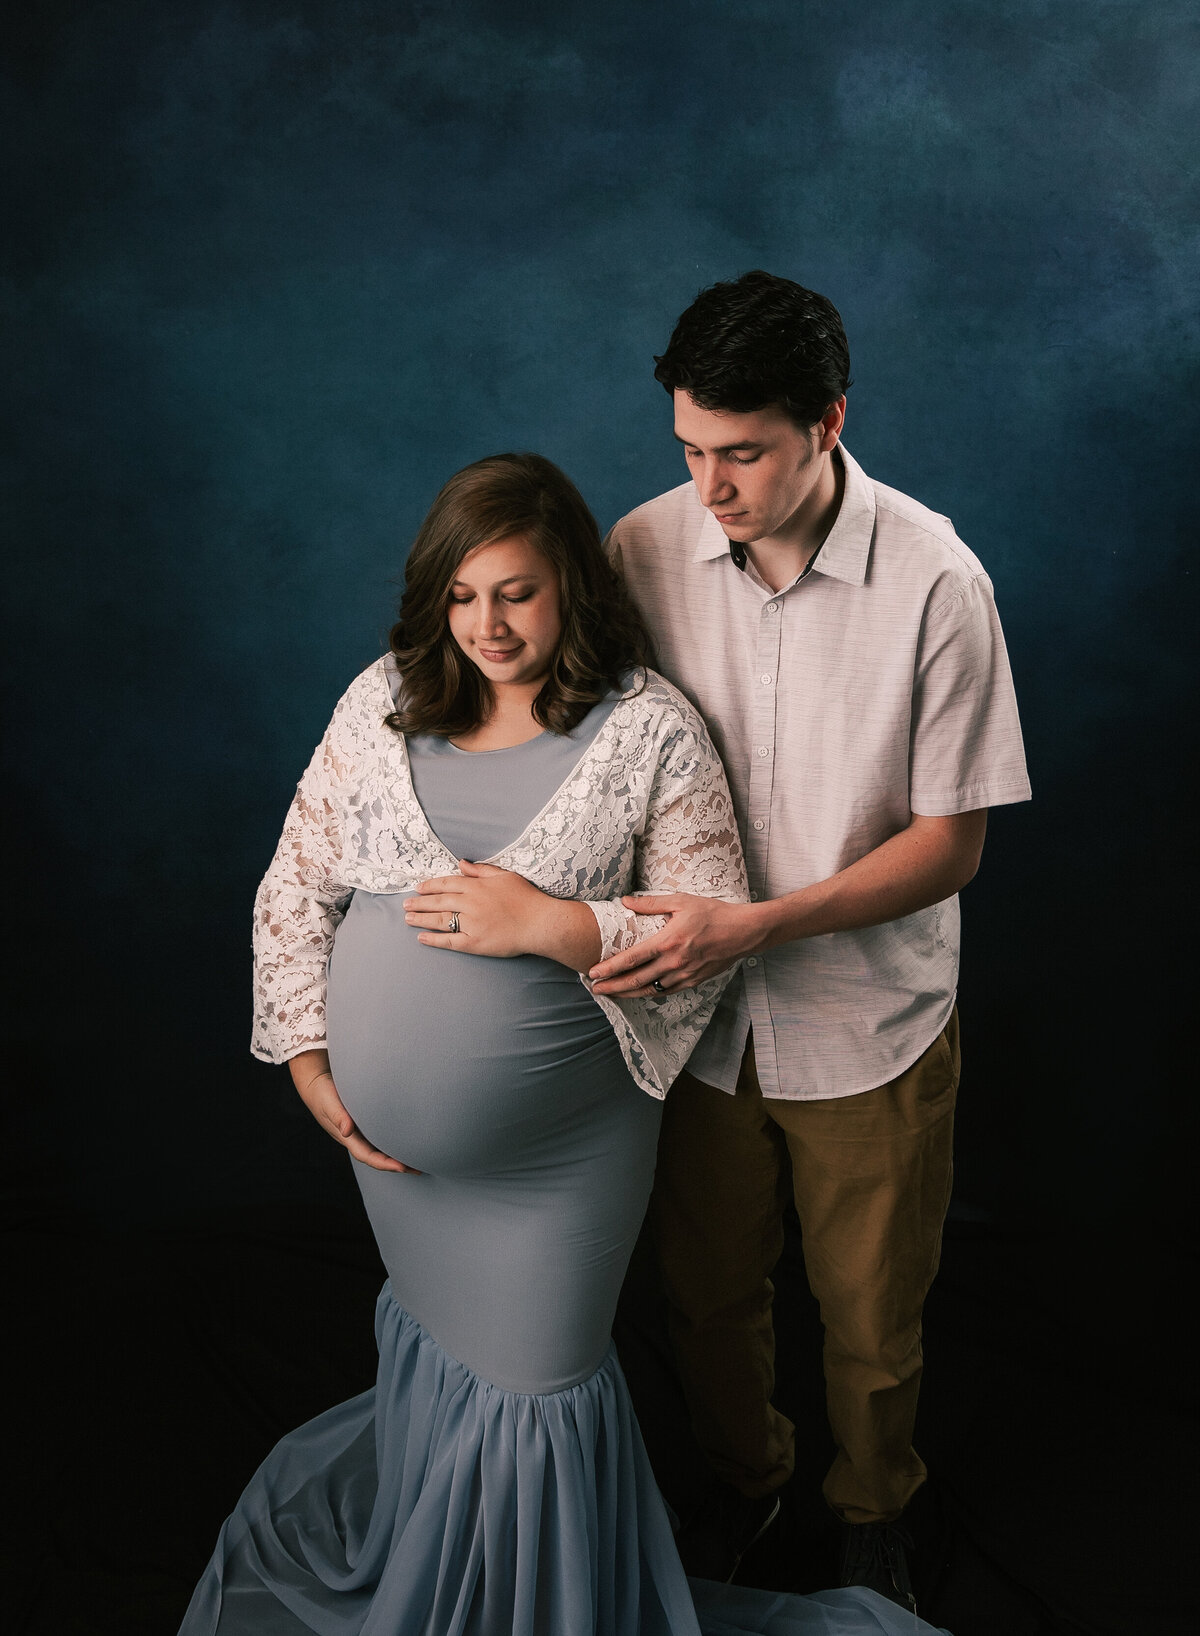 A studio maternity session with mom and dad. Utah maternity photography.